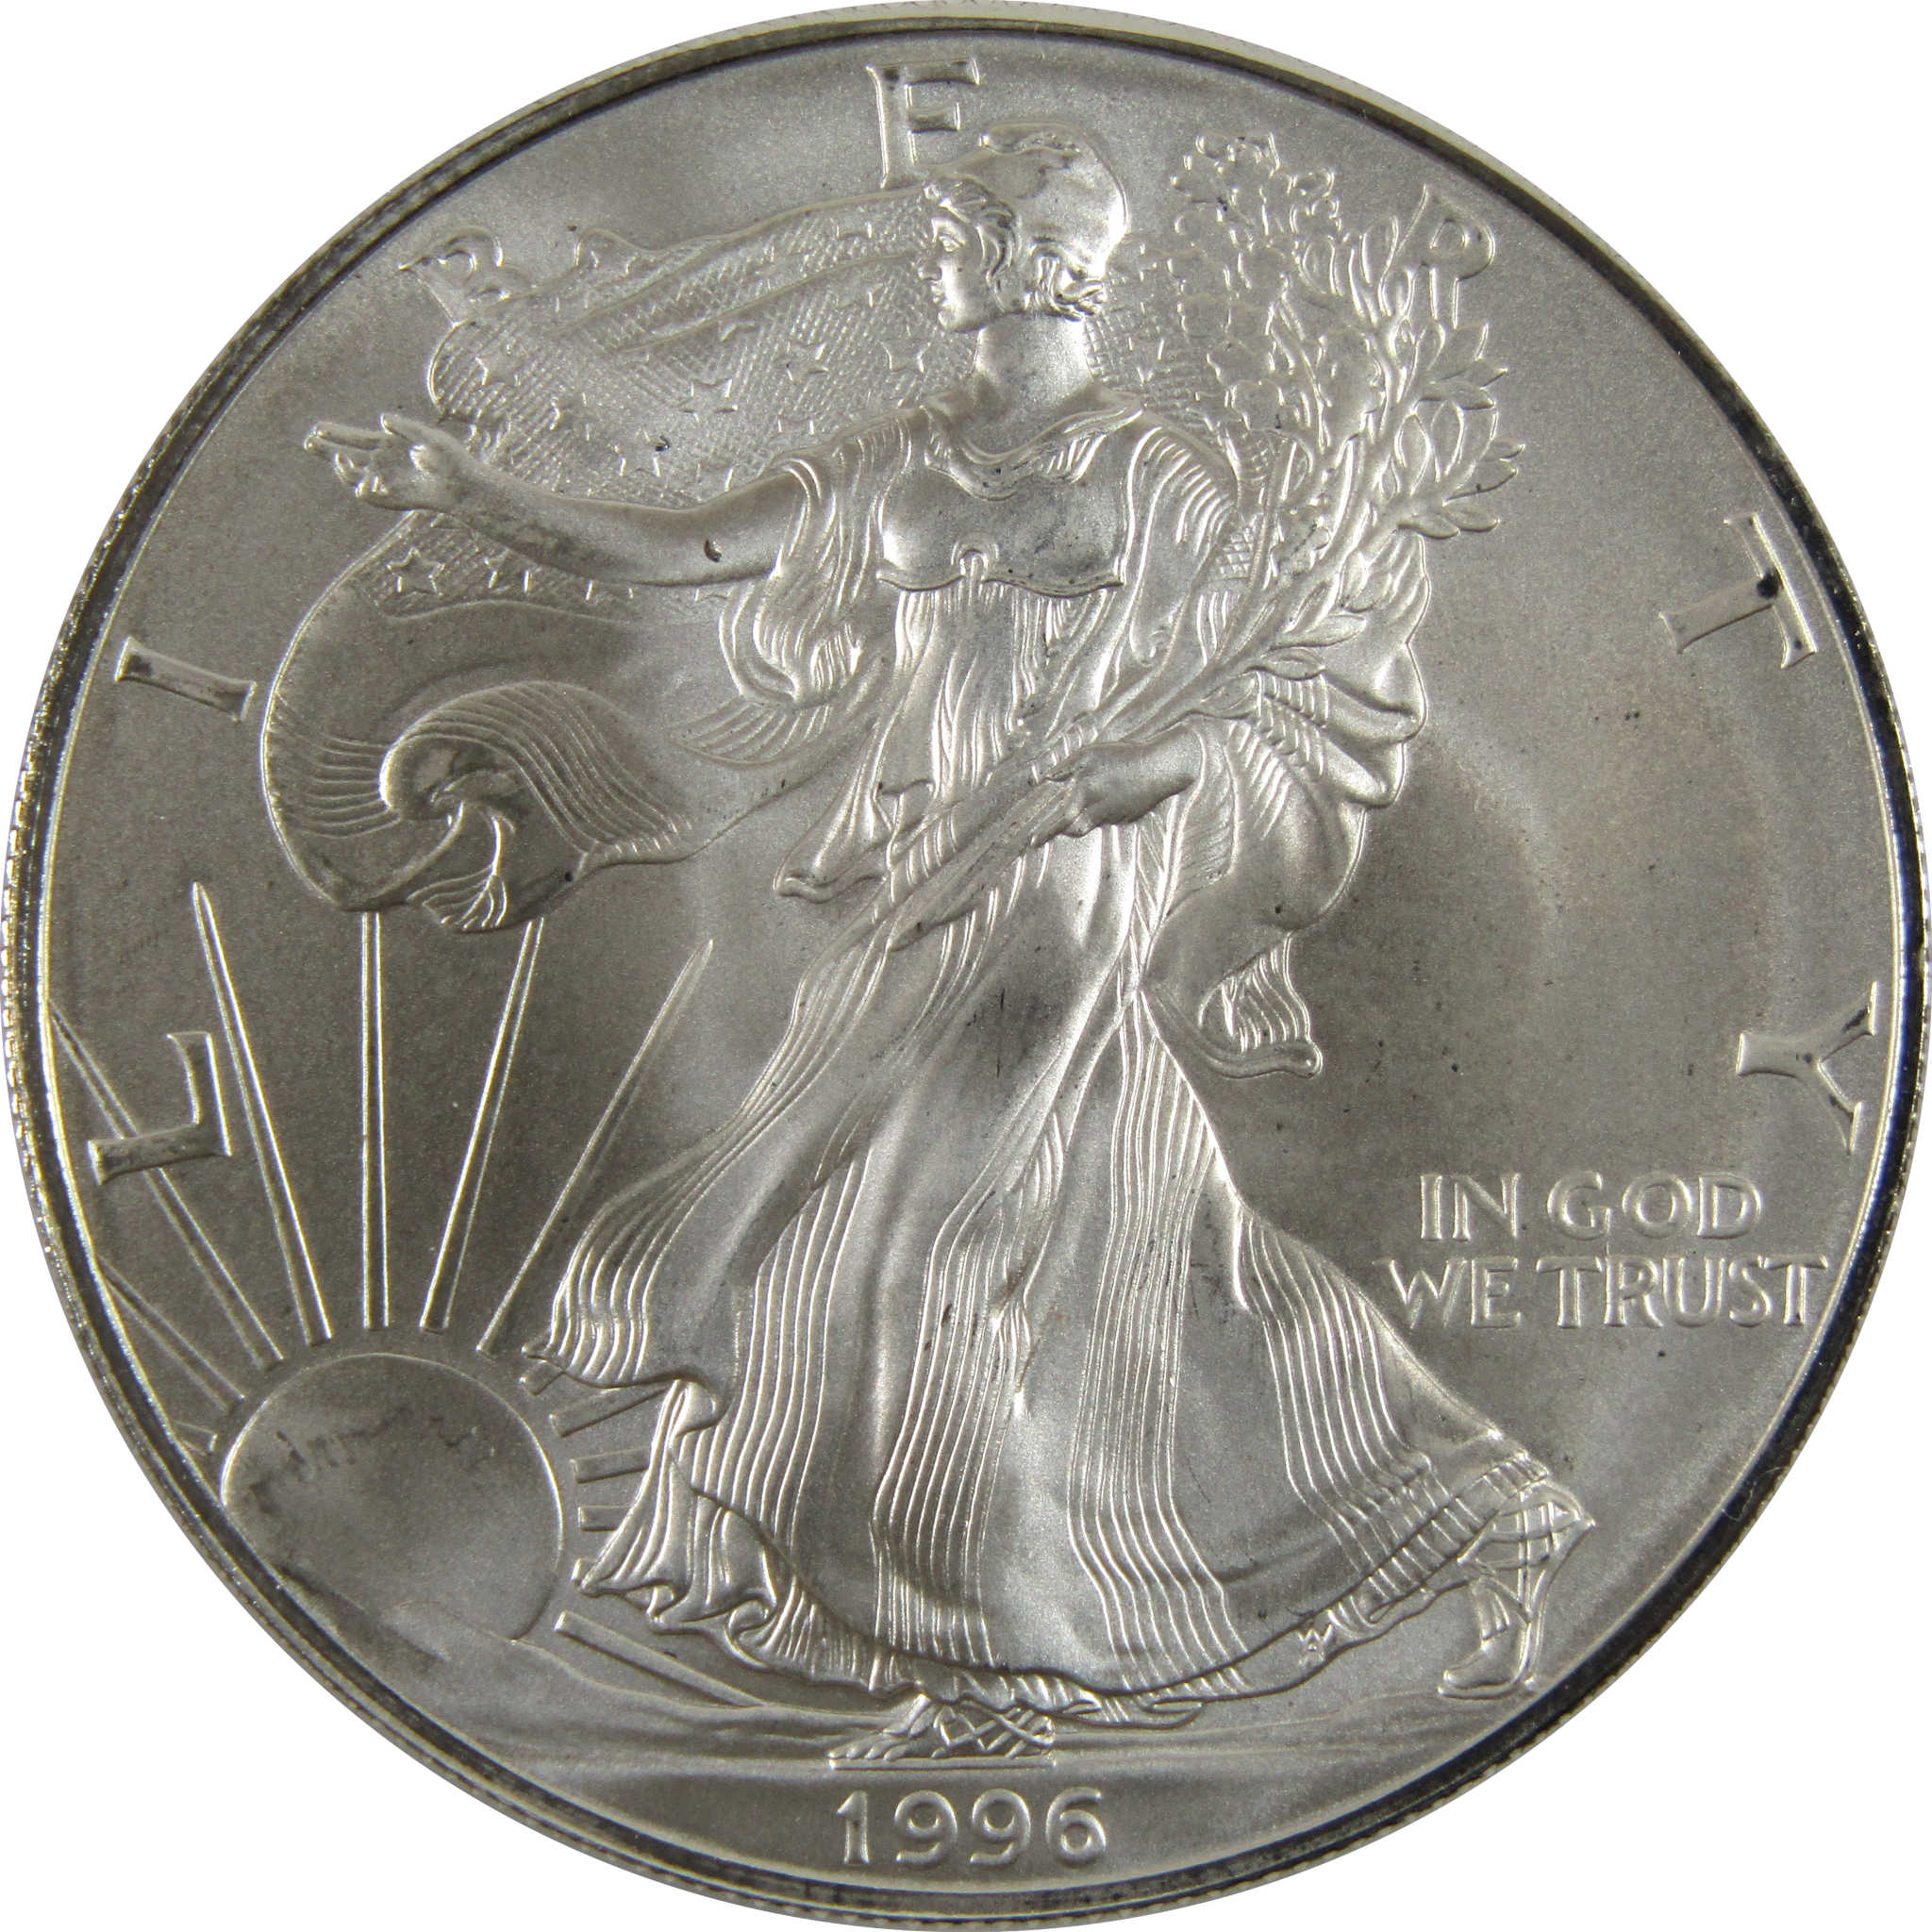 Invest in Bullion Coins  Profile Coins & Collectibles